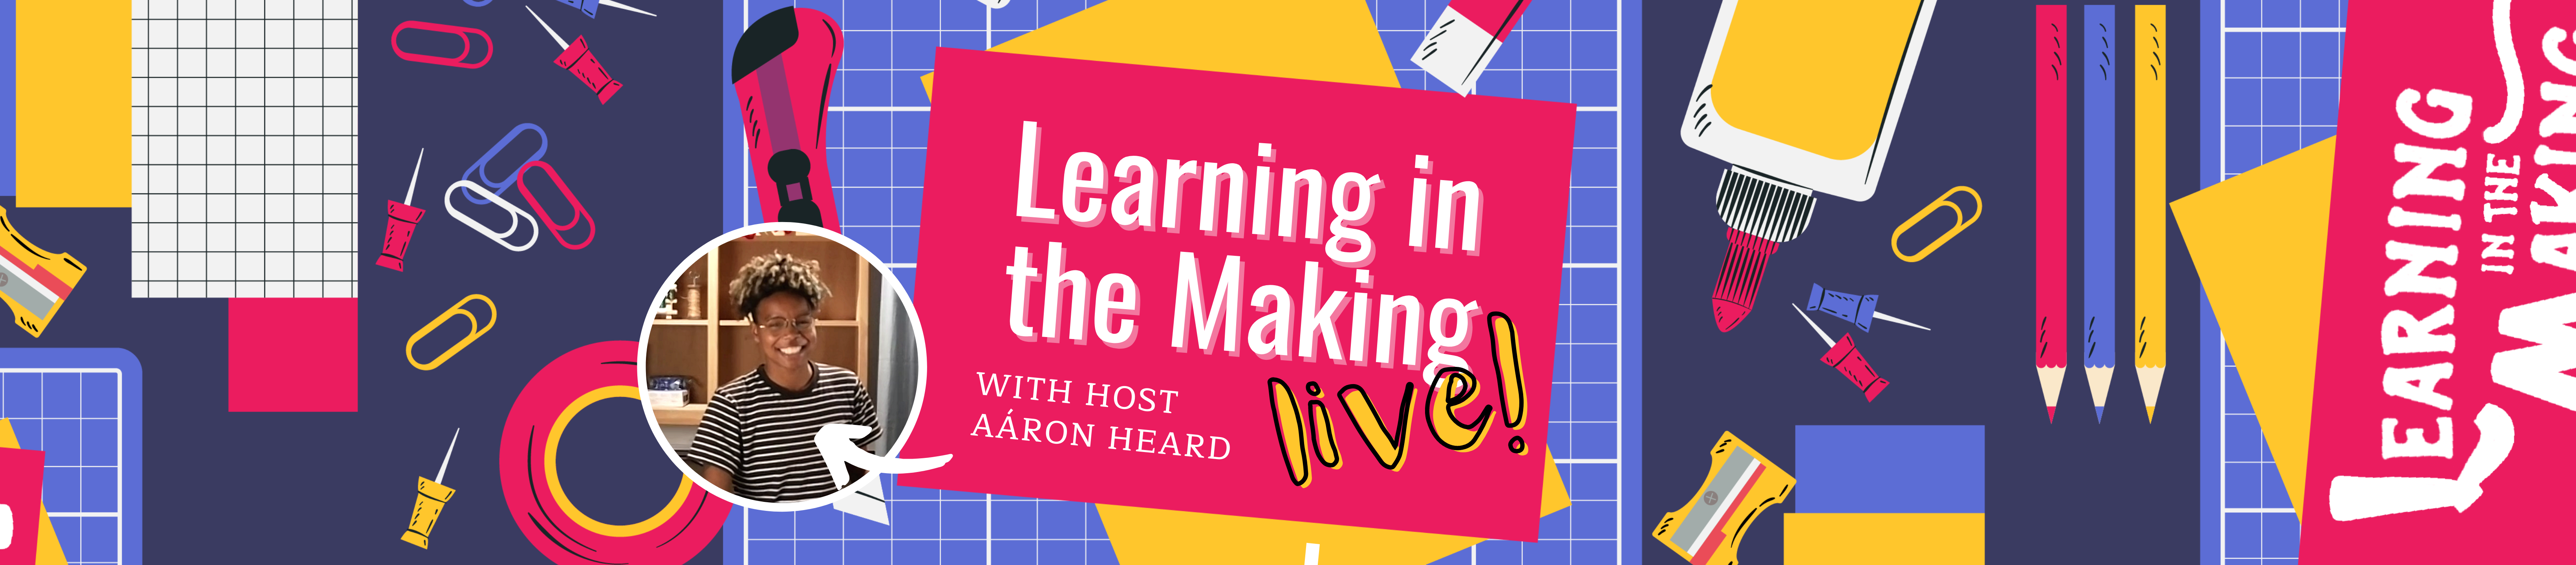 Watch "Learning in the Making Live" on Youtube